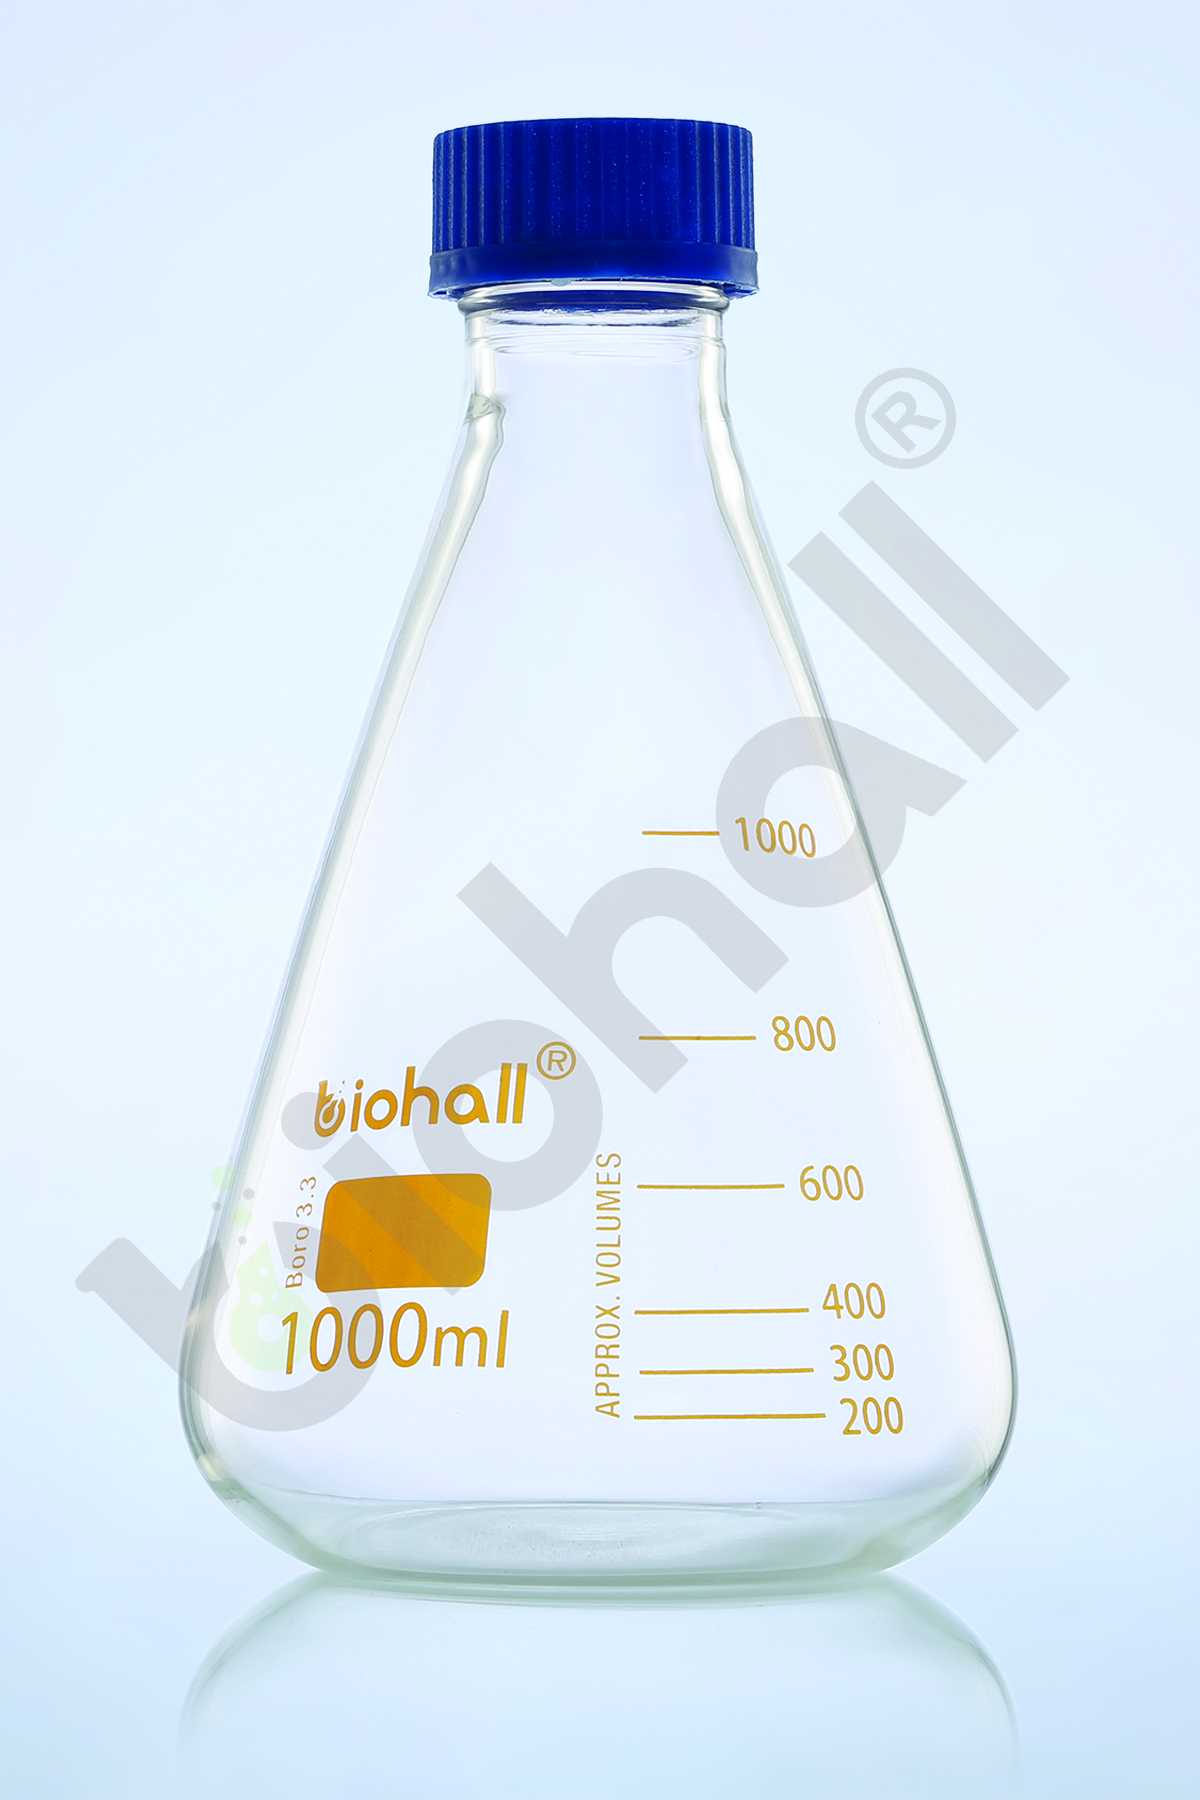 Conical (Erlenmeyer) Flask With Screw Cap